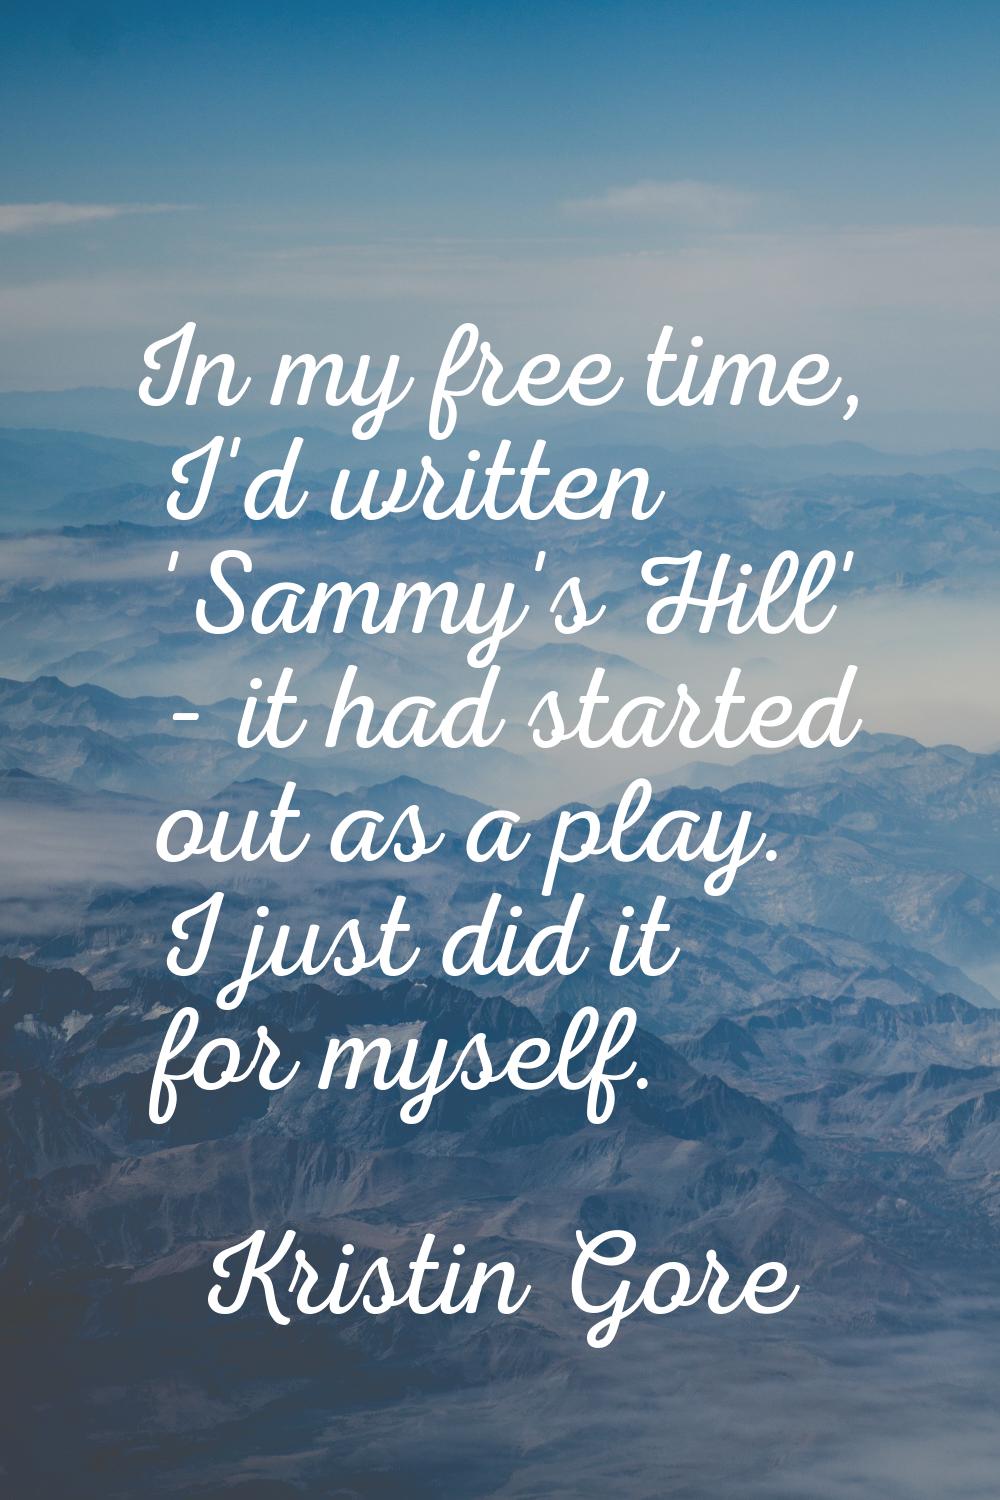 In my free time, I'd written 'Sammy's Hill' - it had started out as a play. I just did it for mysel